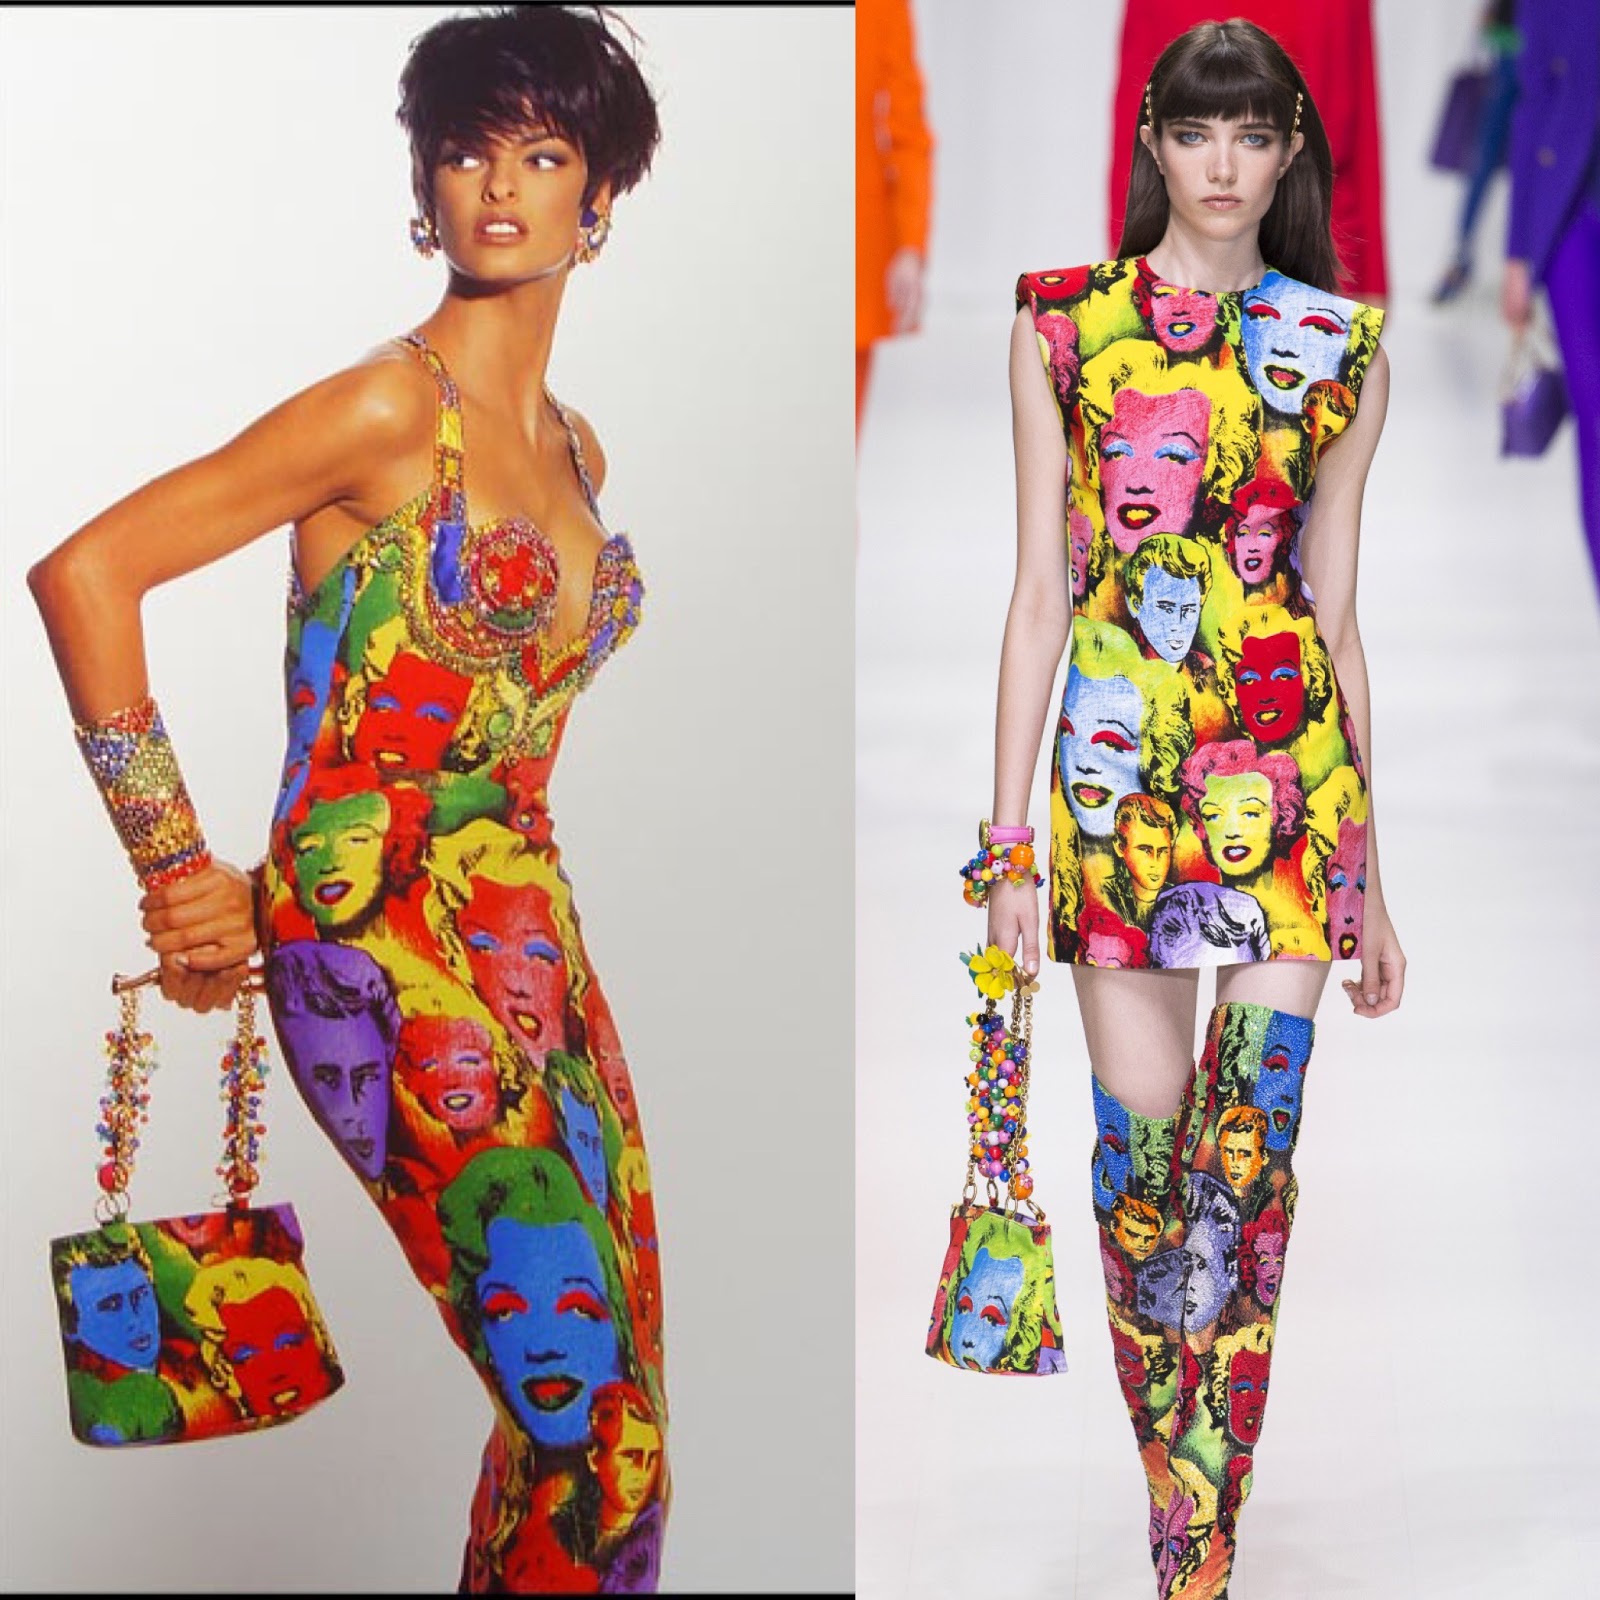 A Tribute To Gianni Versace's Most Iconic Designs Iconic Dresses, Pop ...